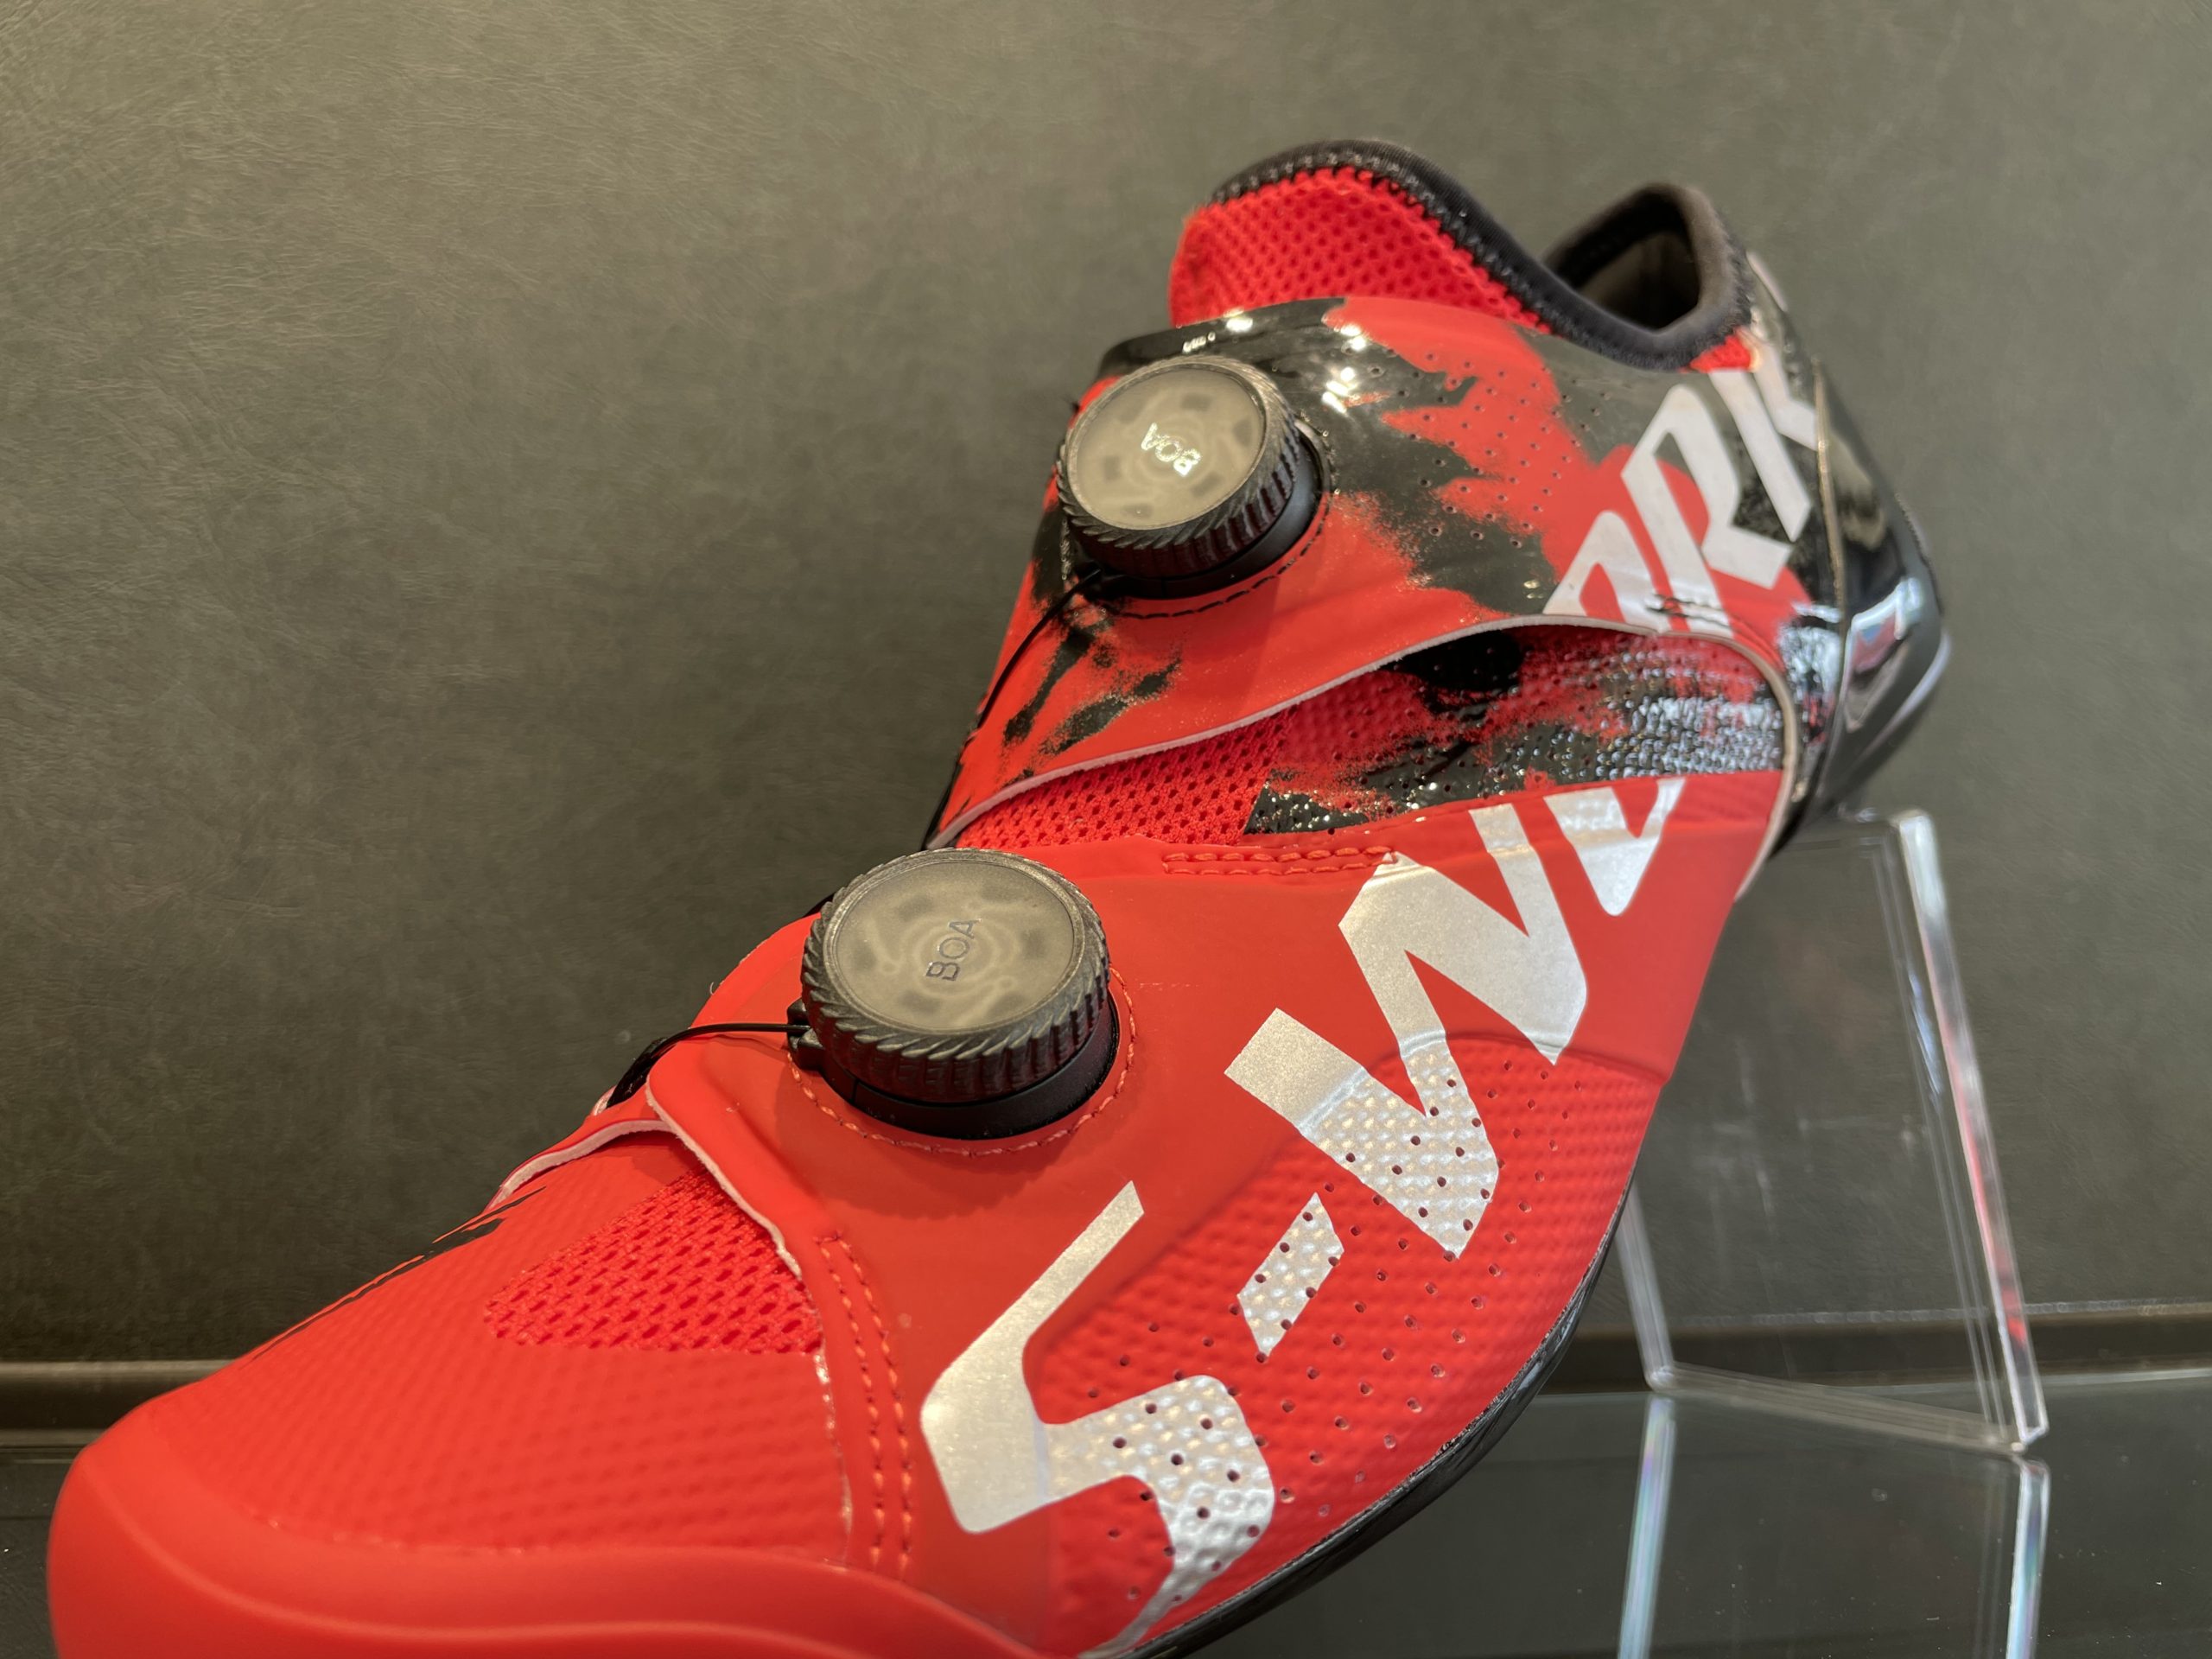 S-WORKS ARES ROAD SHOE 入荷しました❗ | BEACH LINE BICYCLE | 熊本 ...